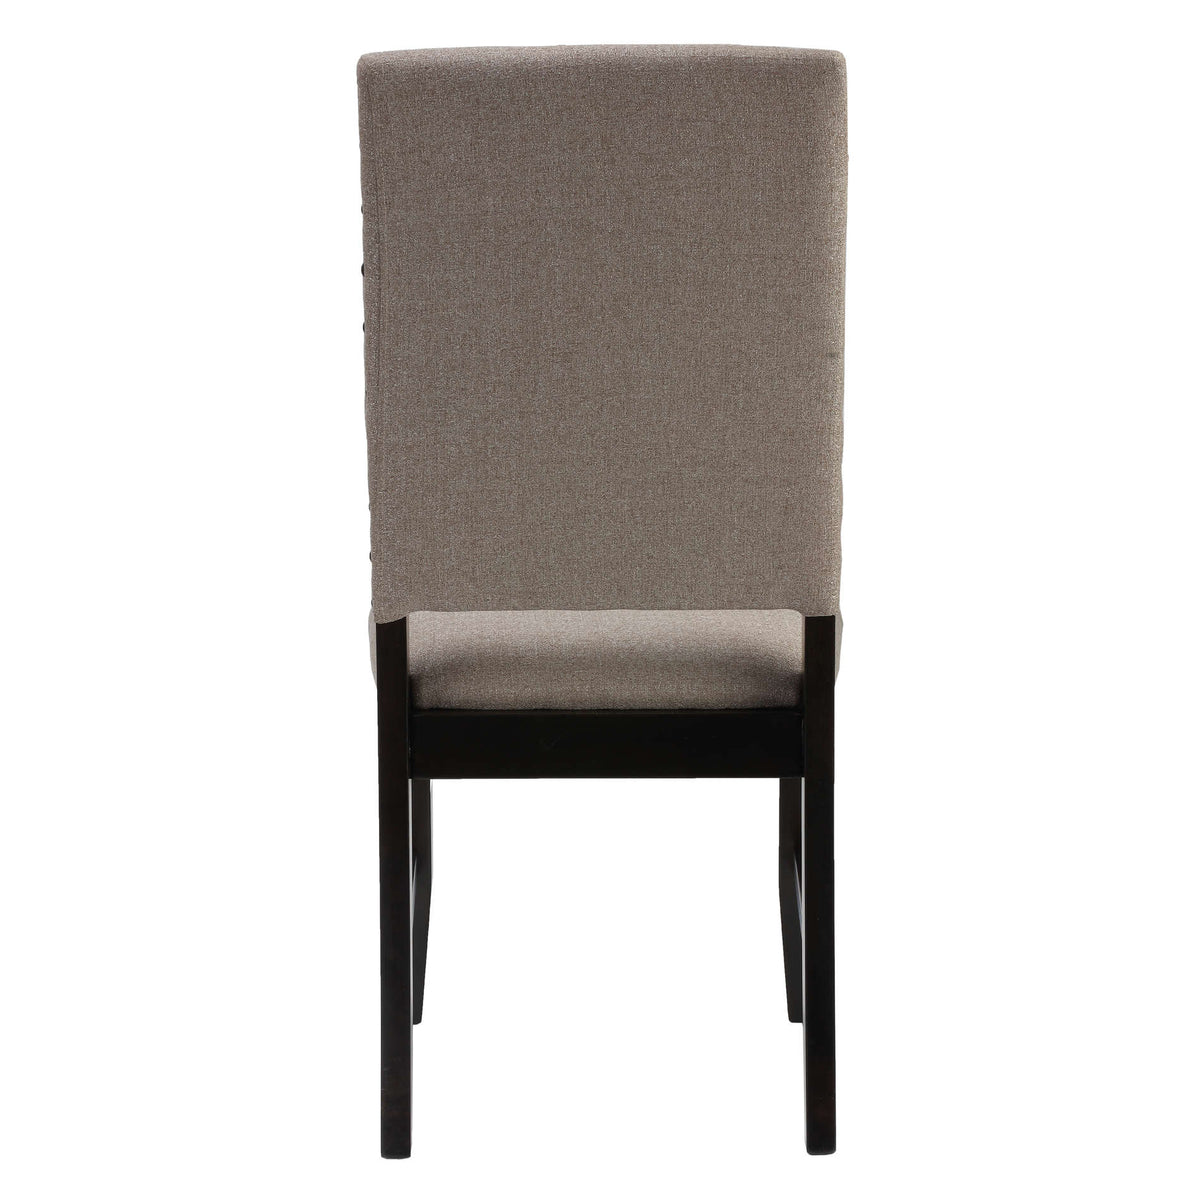 Cortesi Home Manchester Dining Chairs in Taupe Fabric with Black Wood Legs and Nailhead Accents, Set of 2